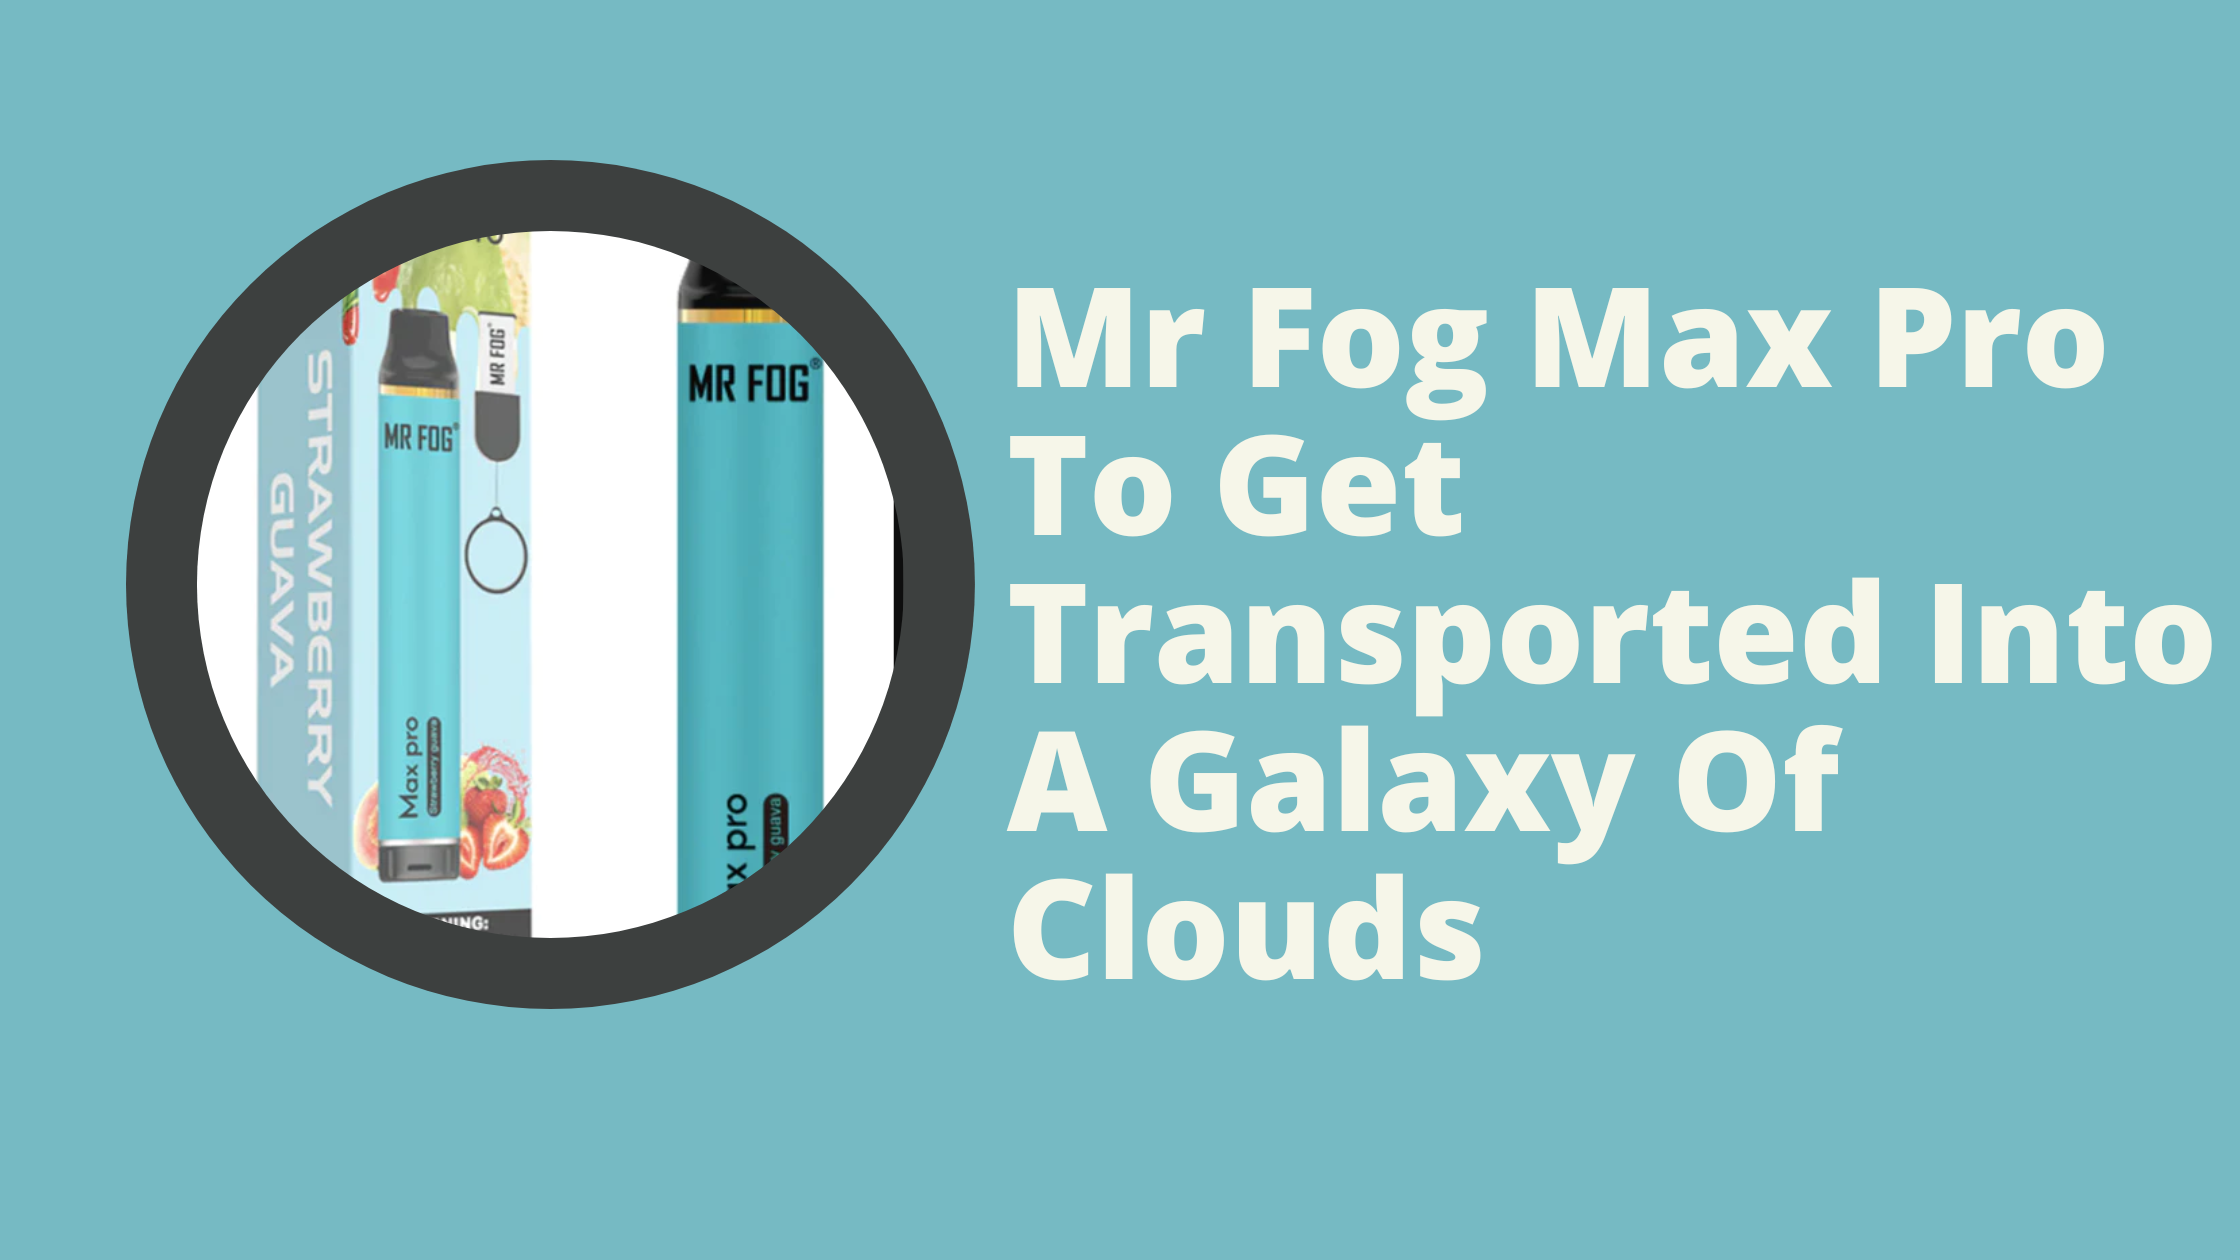 Mr Fog Max Pro To Get Transported Into A Galaxy Of Clouds